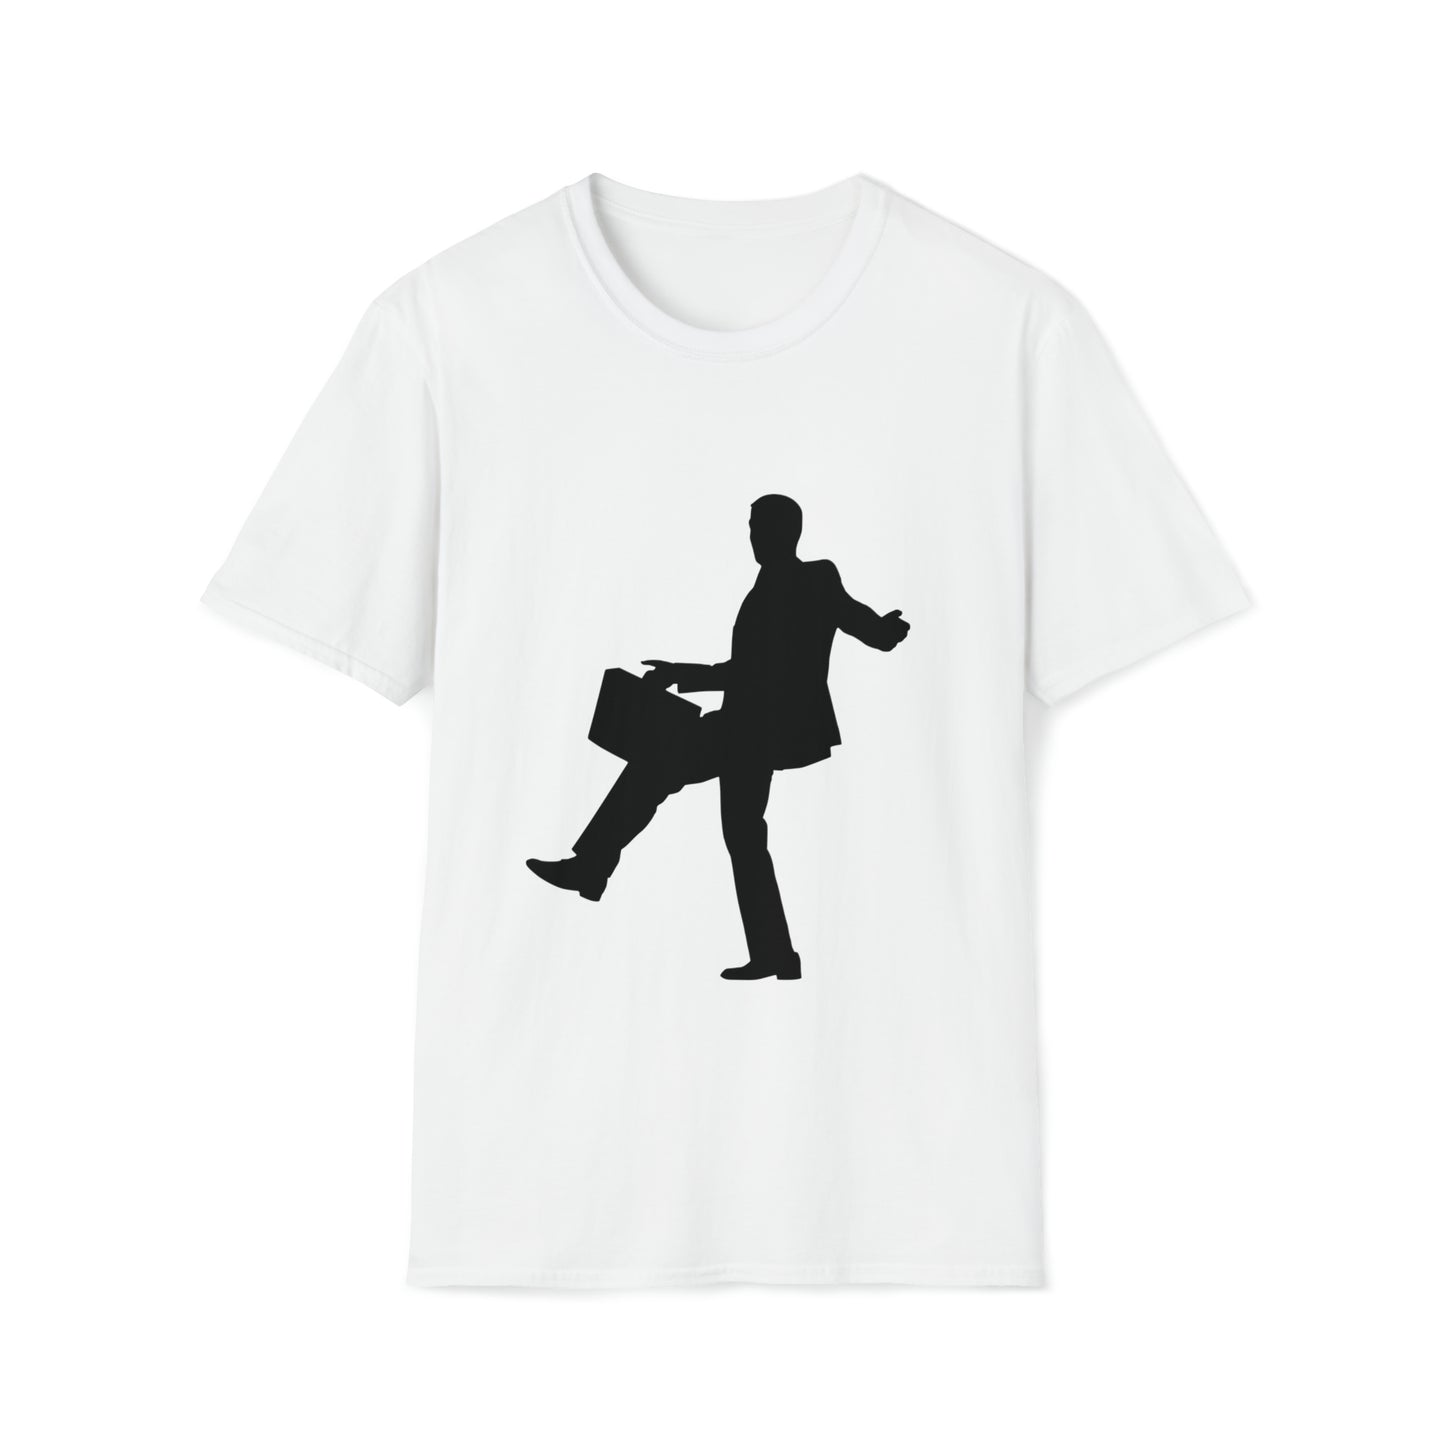 Man on a tightrope T-Shirt